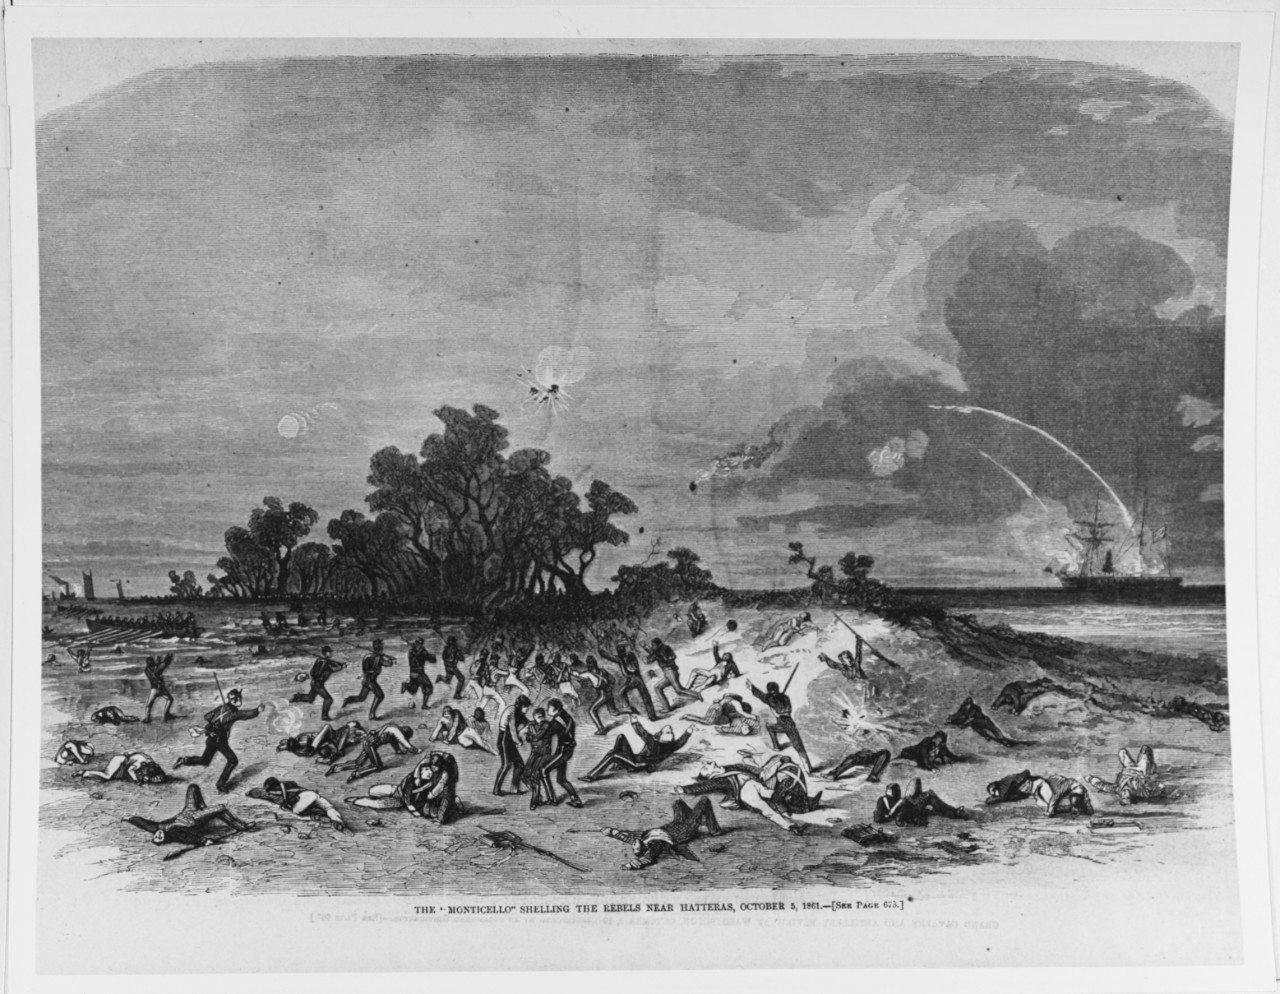 Photo #: NH 59253  &quot;The 'Monticello' Shelling the Rebels near Hatteras, October 5, 1861.&quot;